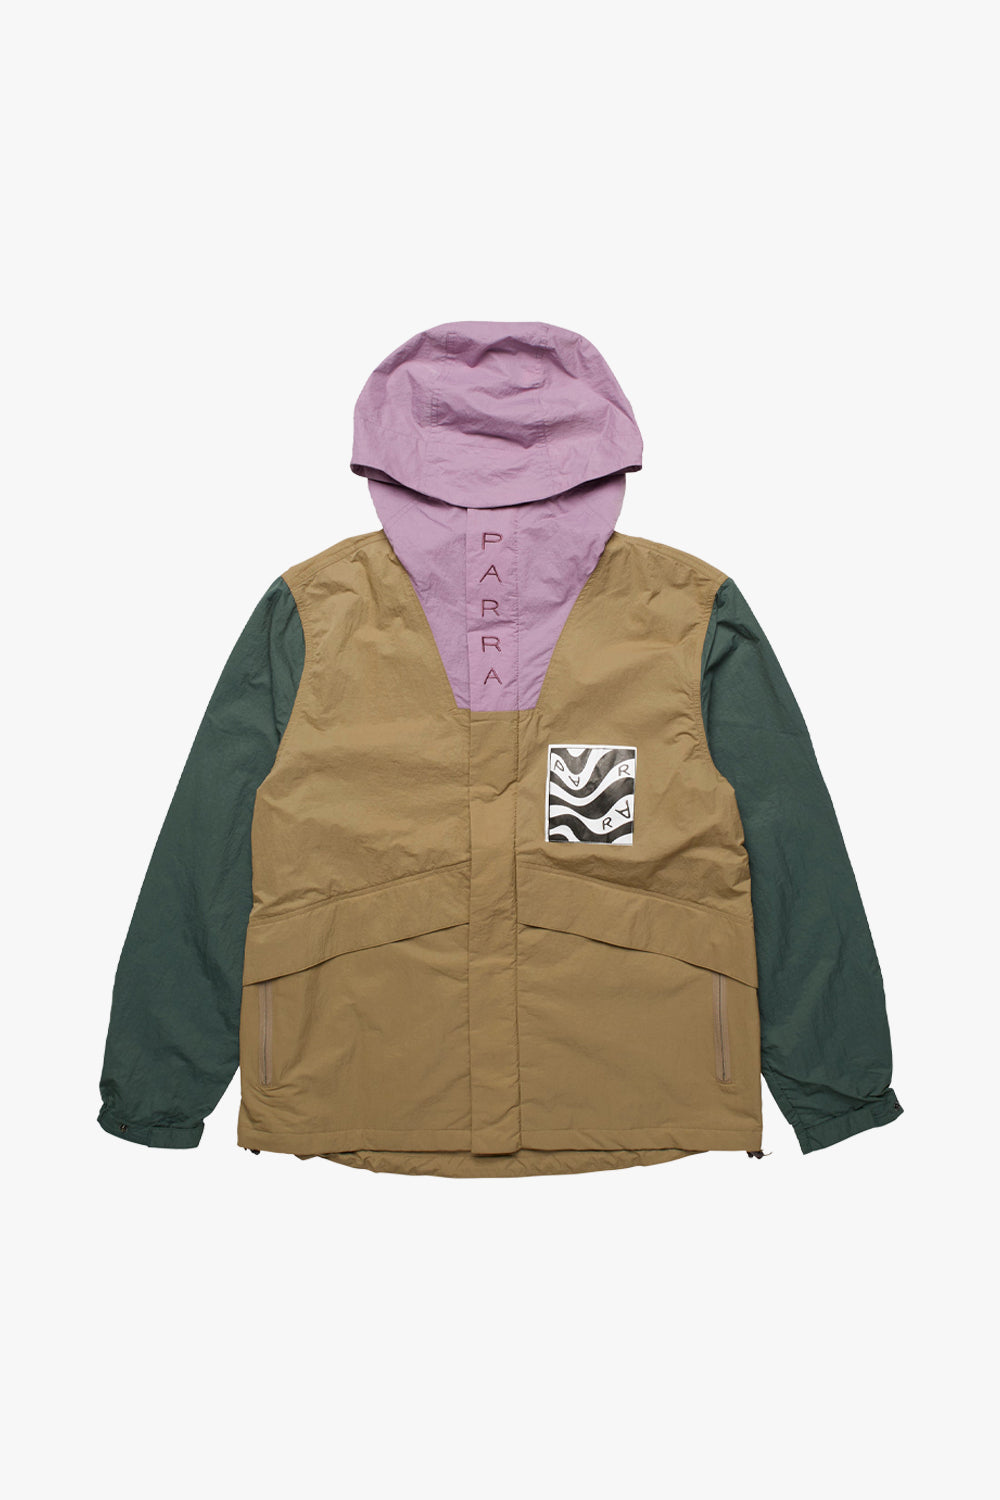 By Parra Distorted Logo Jacket